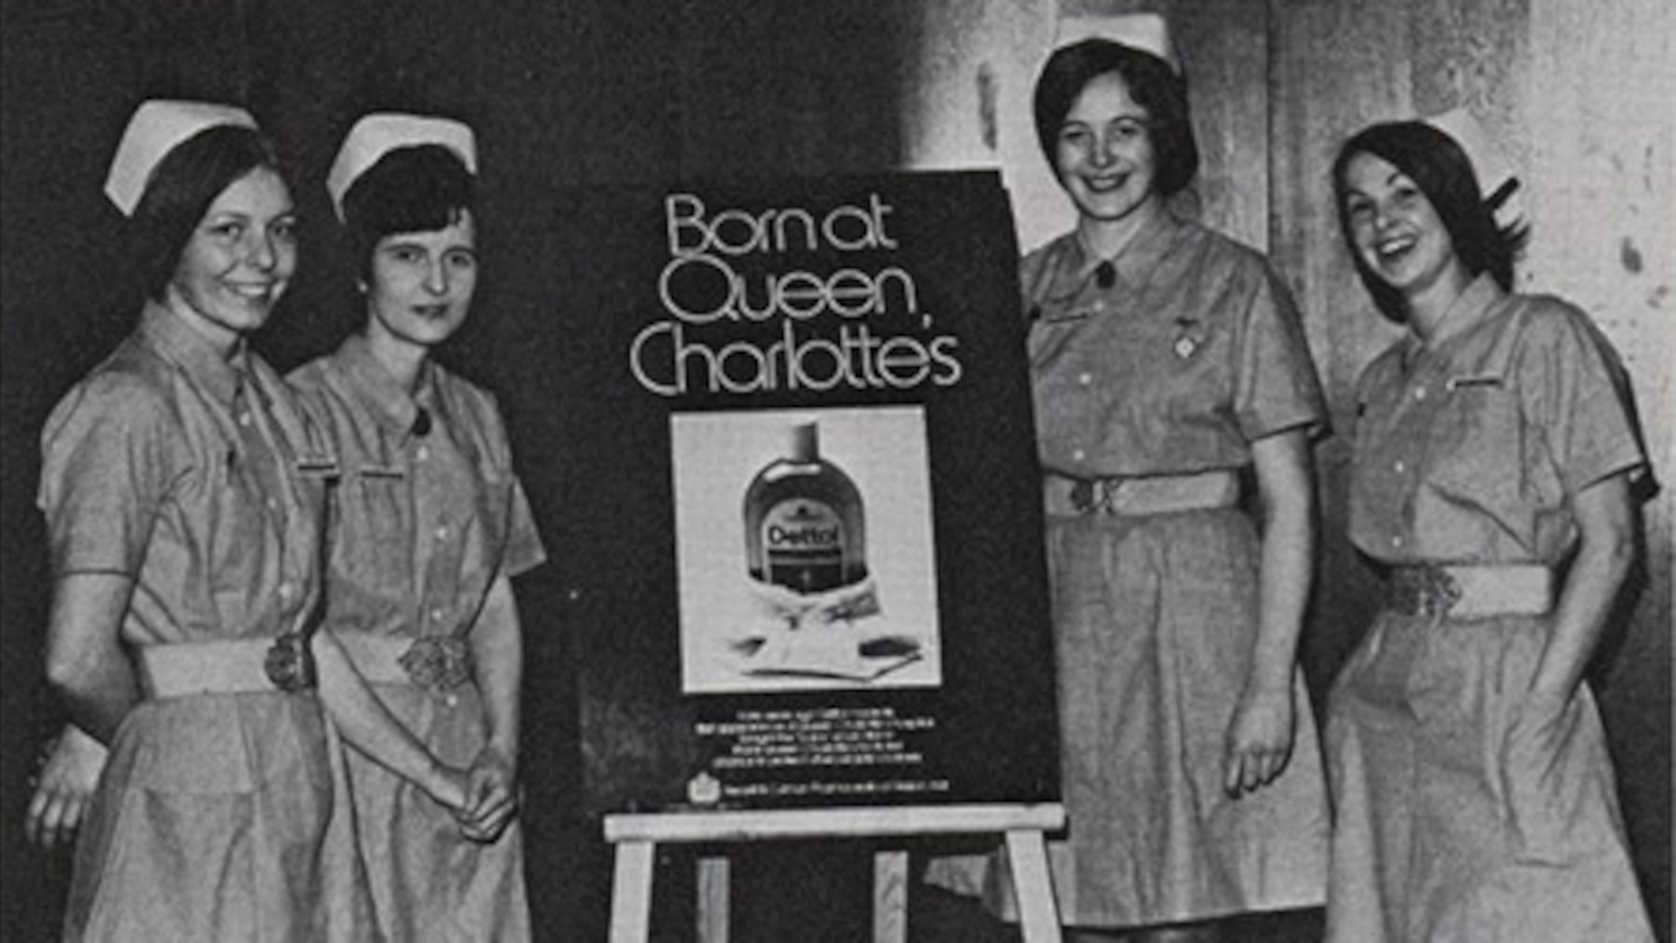 Old photo of Dettol launch: "Born at Queen Charlotte's"